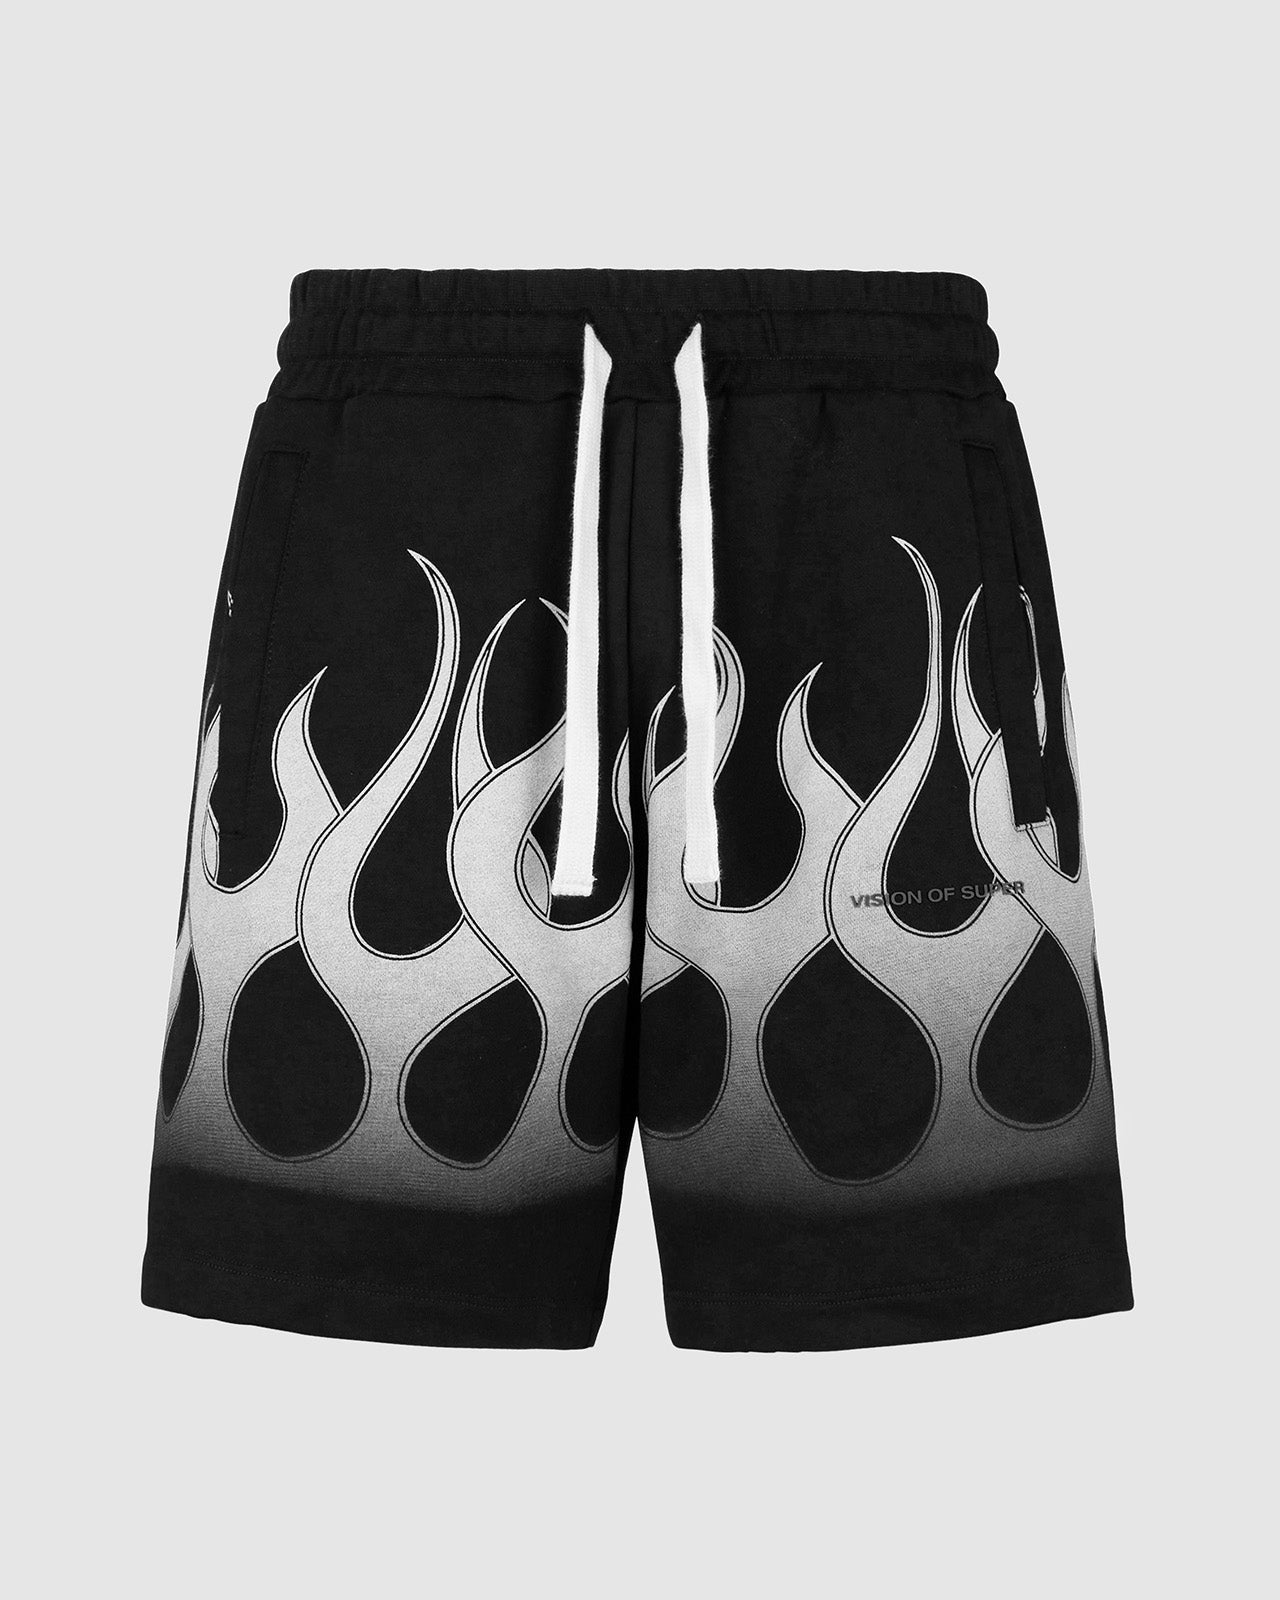 Black Shorts with White / Grey Flames